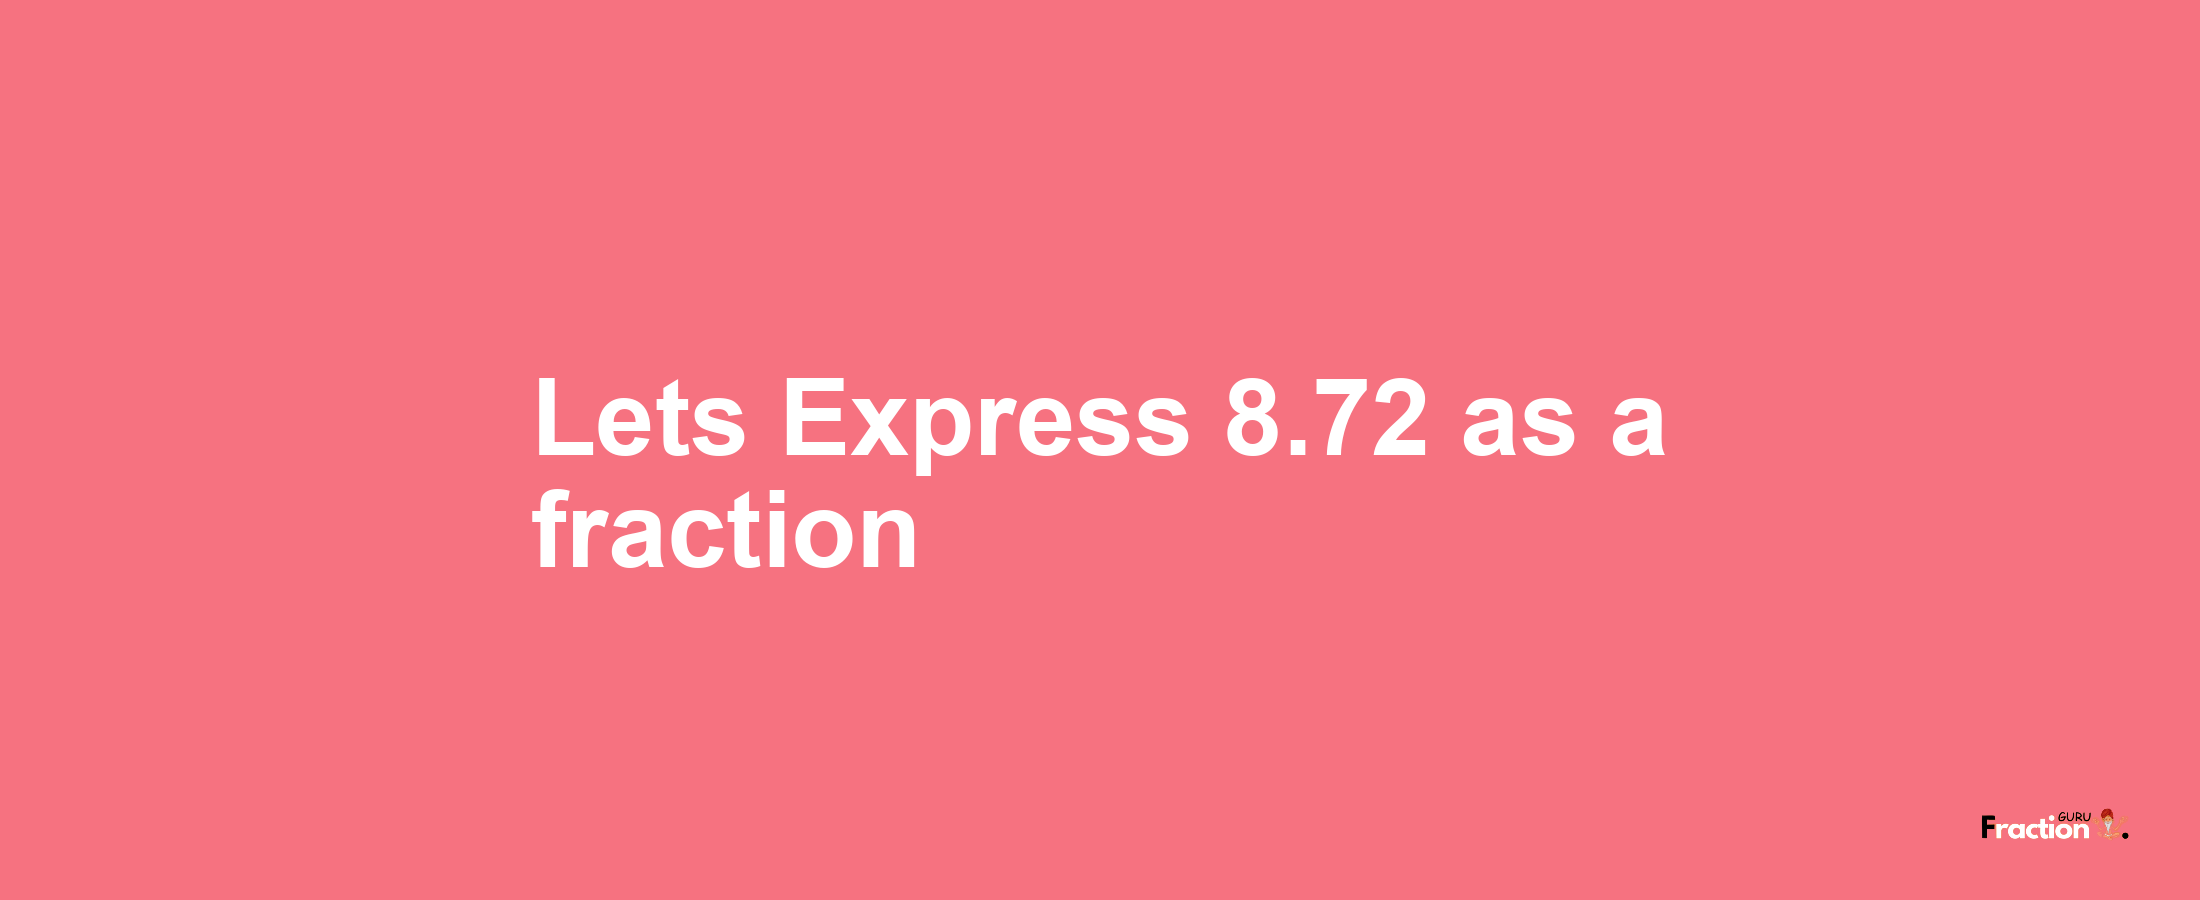 Lets Express 8.72 as afraction